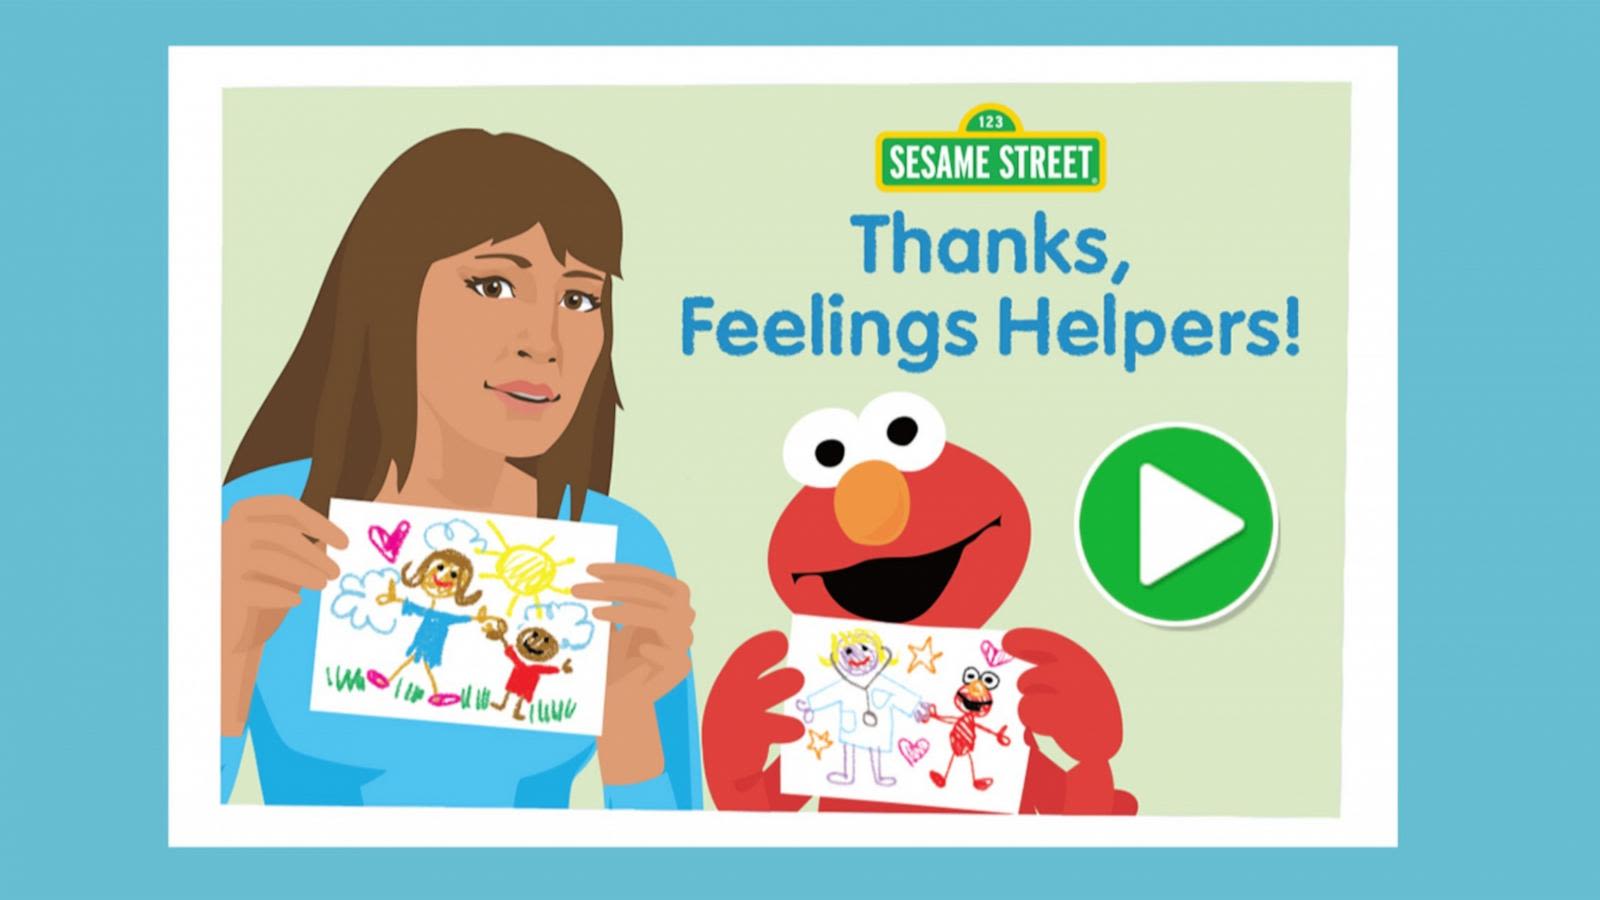 Amid mental health crisis for kids, Elmo steps in to help